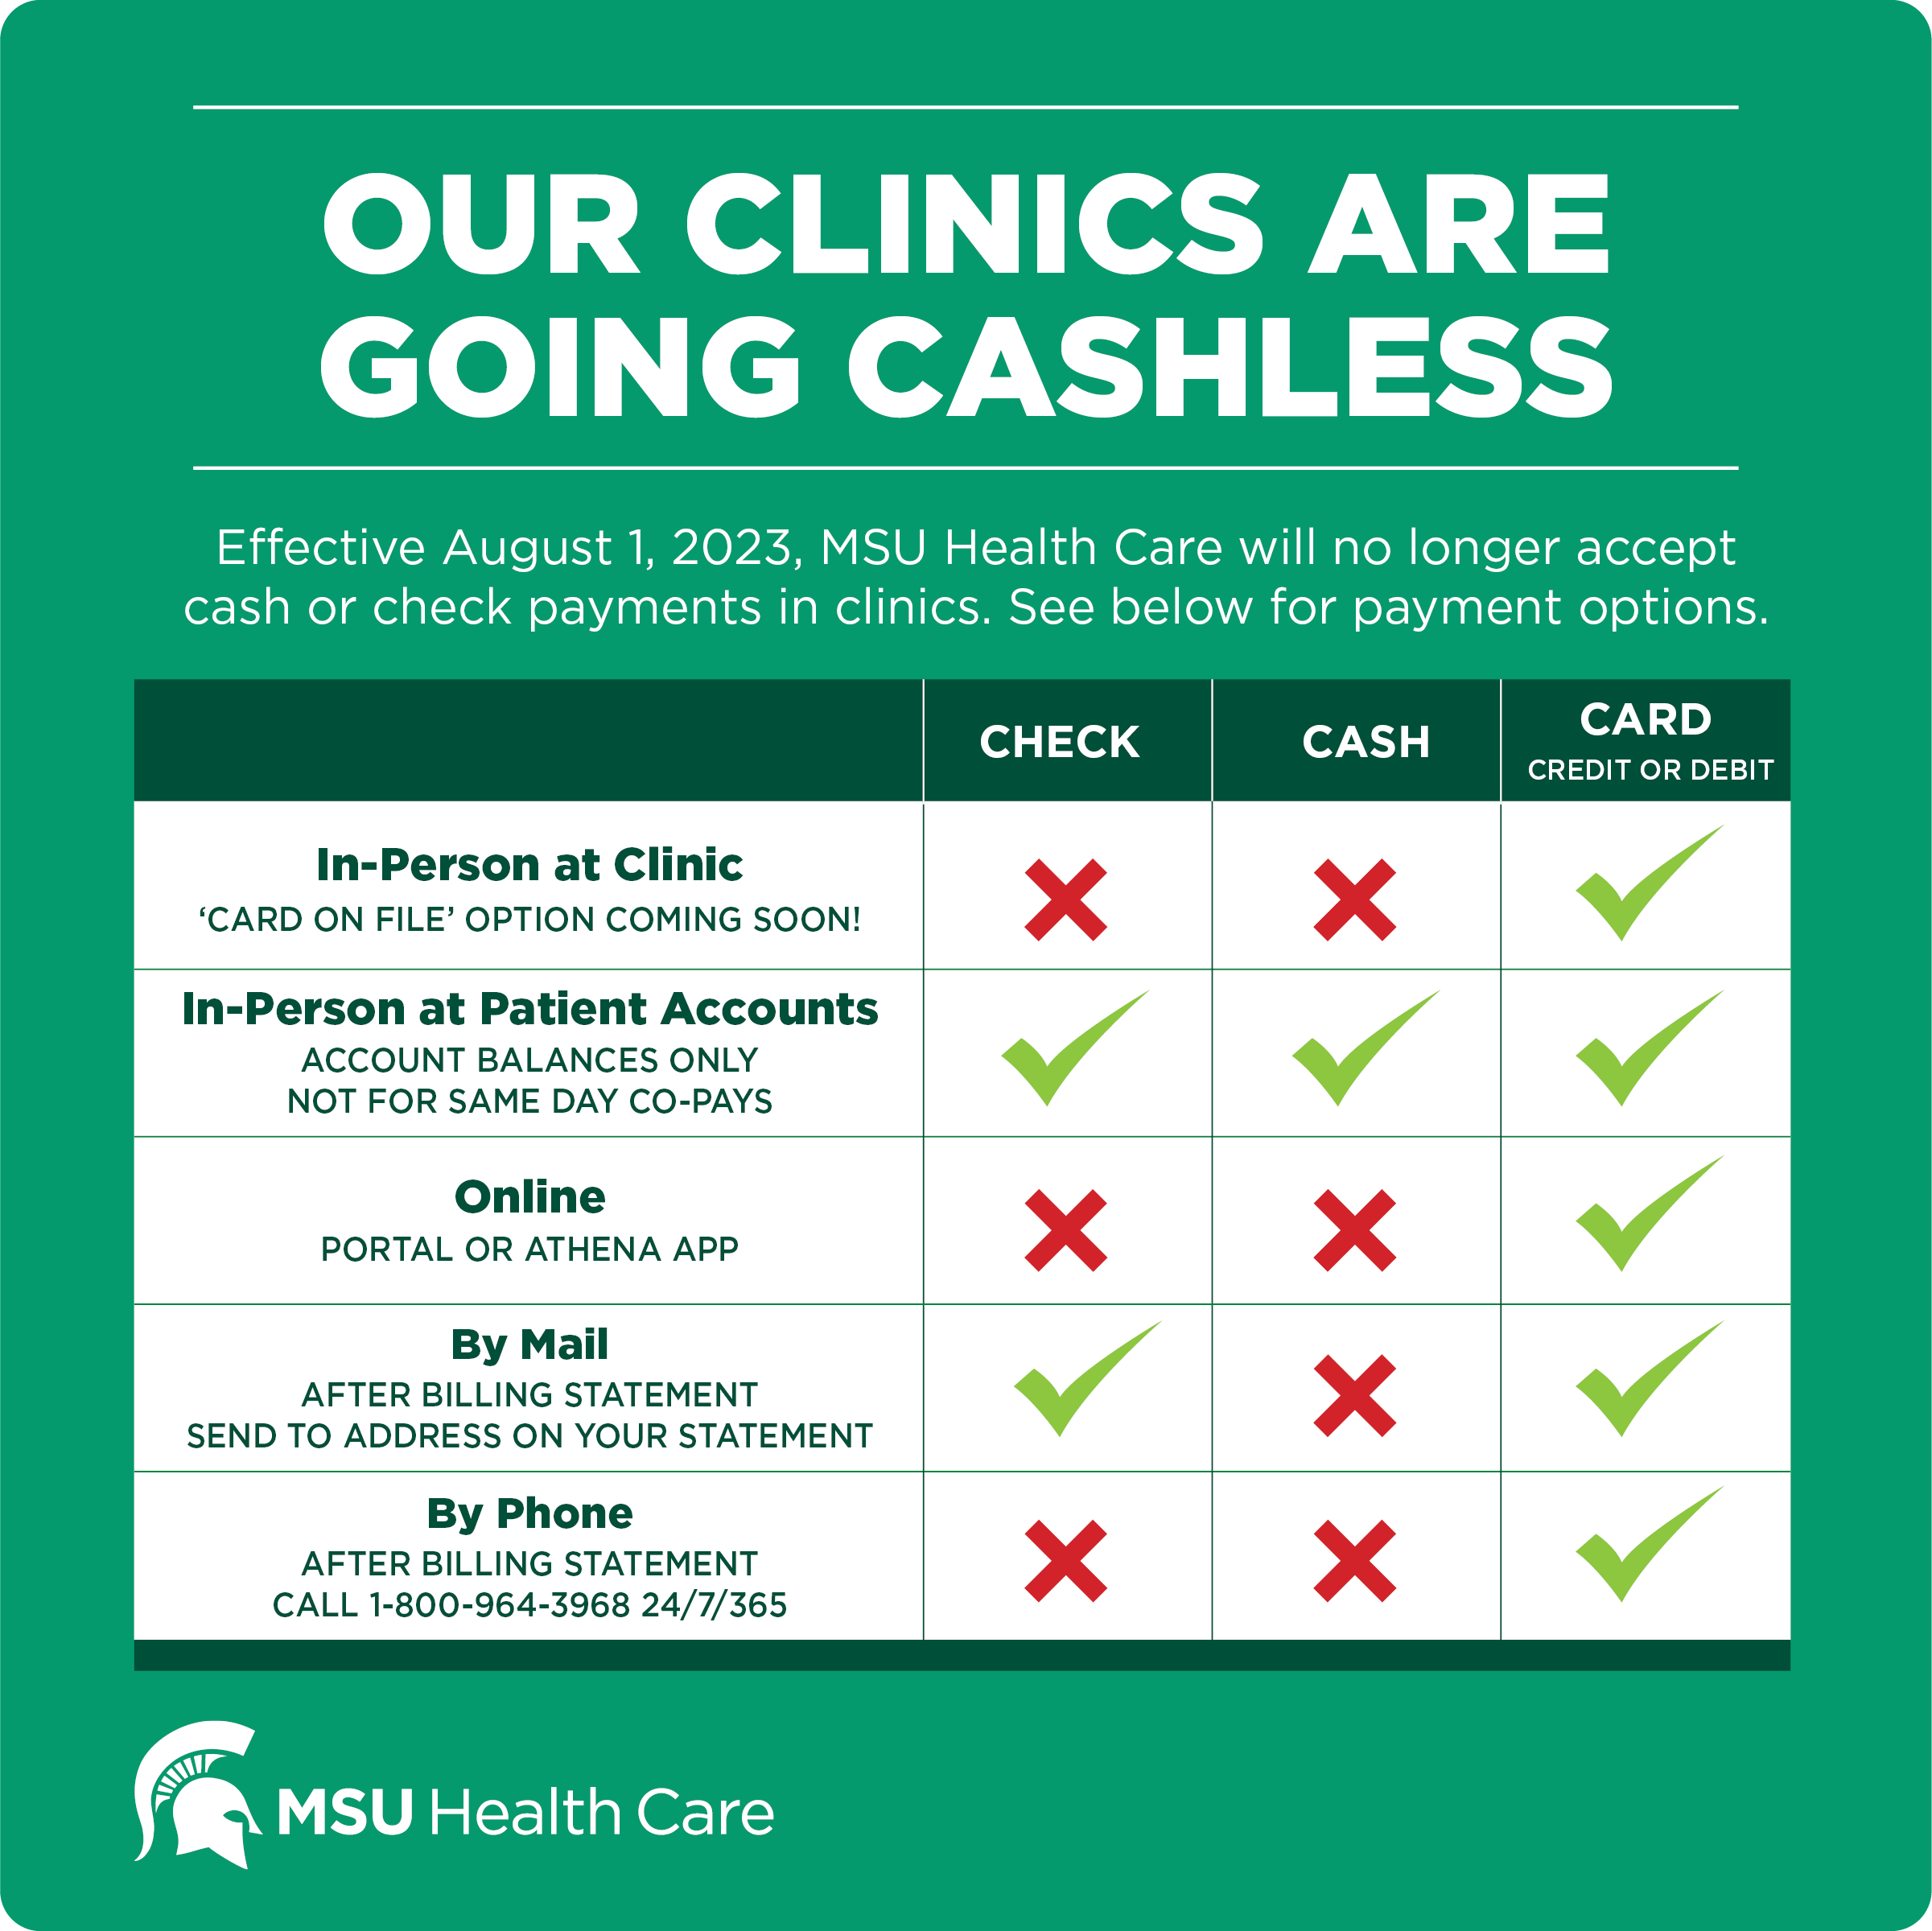 Payment options within MSU Health Care beginning August 1